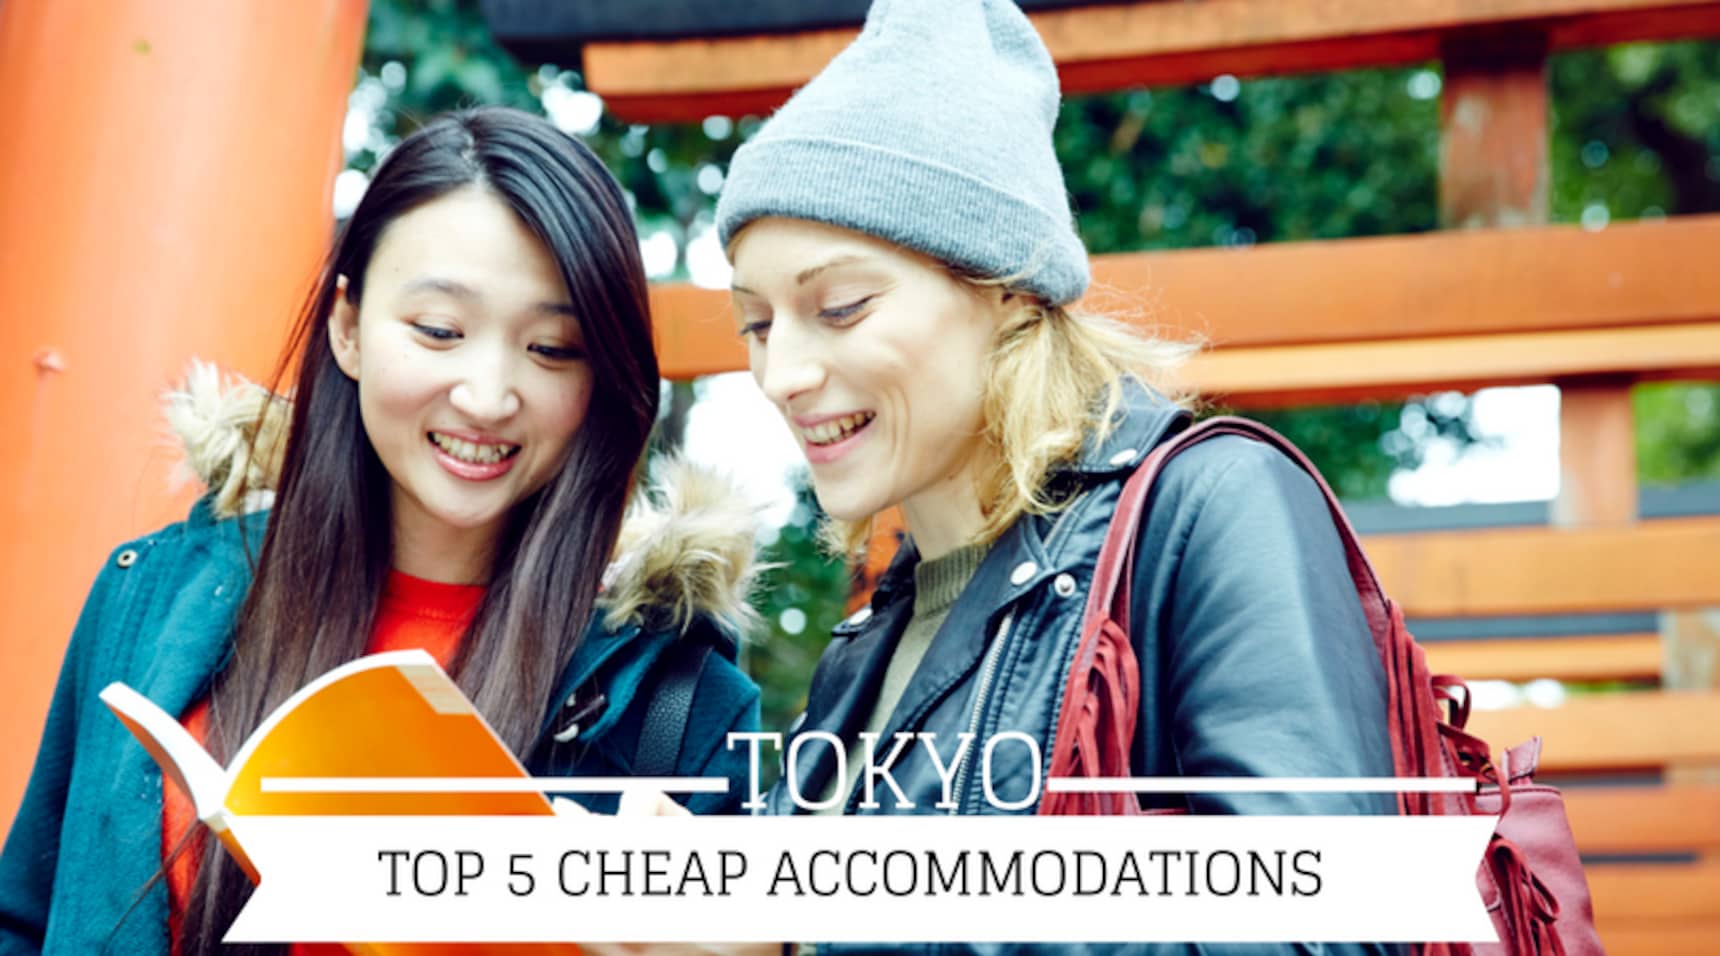 Top 5 Budget Accommodation Types in Tokyo